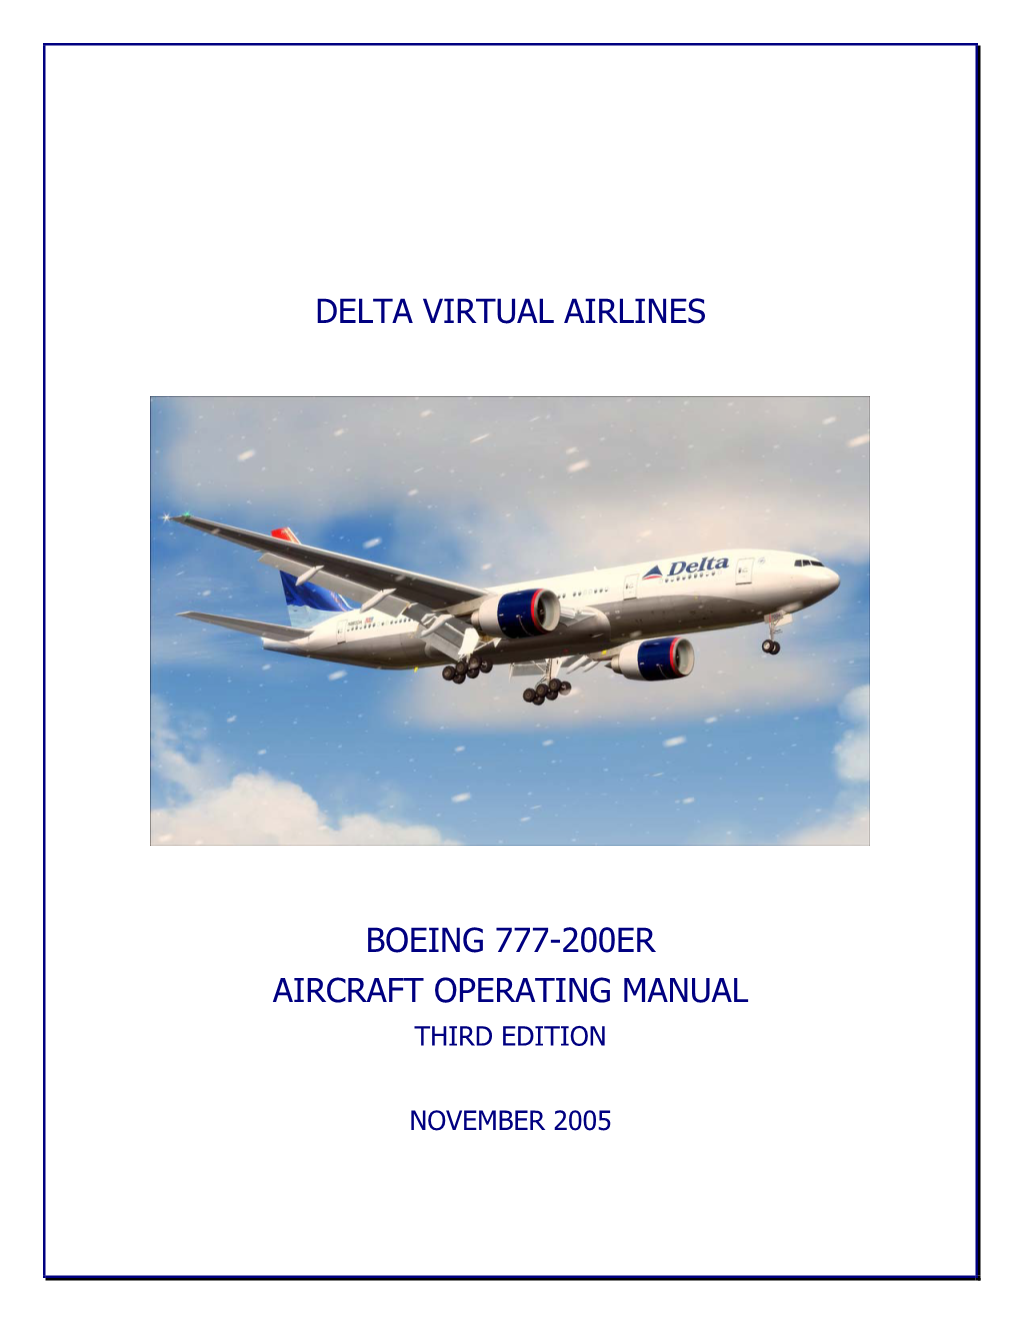 Delta Virtual Airlines Boeing 777-200Er Aircraft Operating Manual